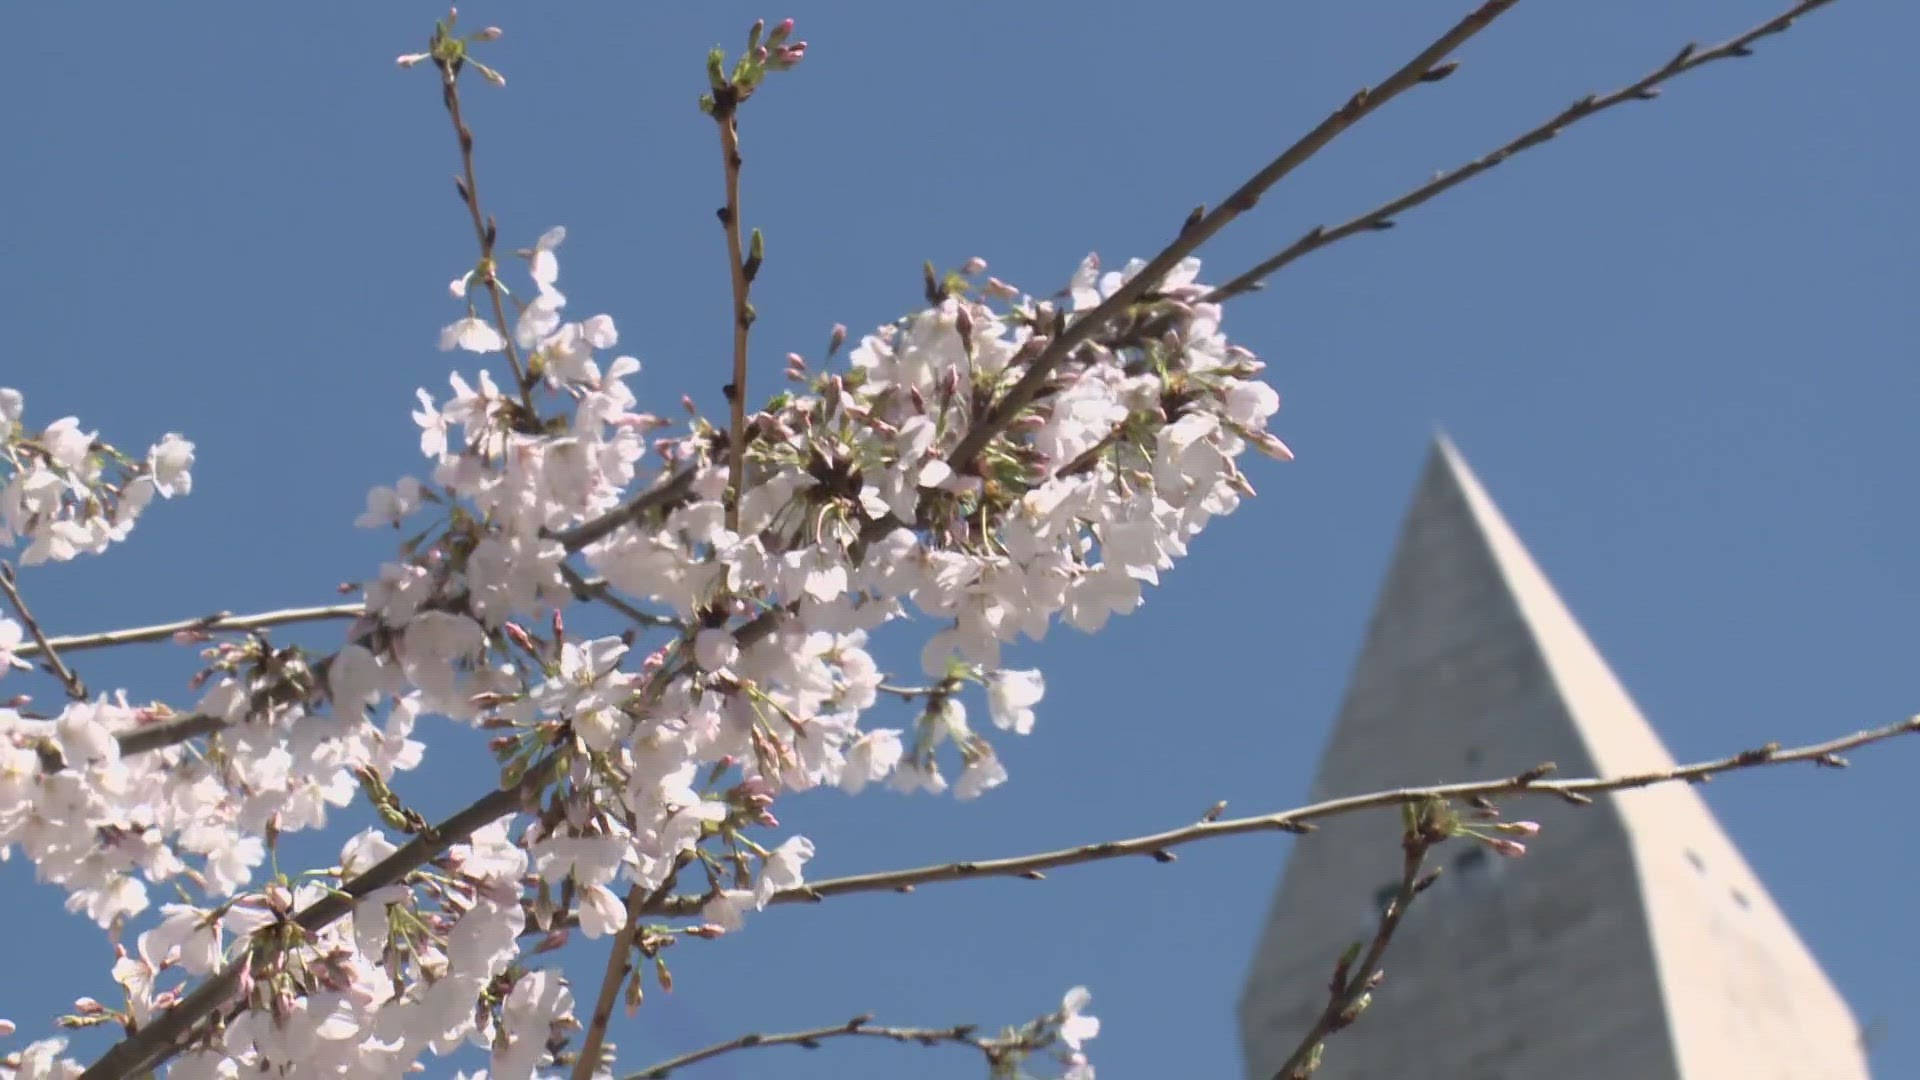 National Park Service leaders will reveal their prediction for peak bloom, or when we can expect at least 70% of the cherry blossoms around the Tidal Basin.